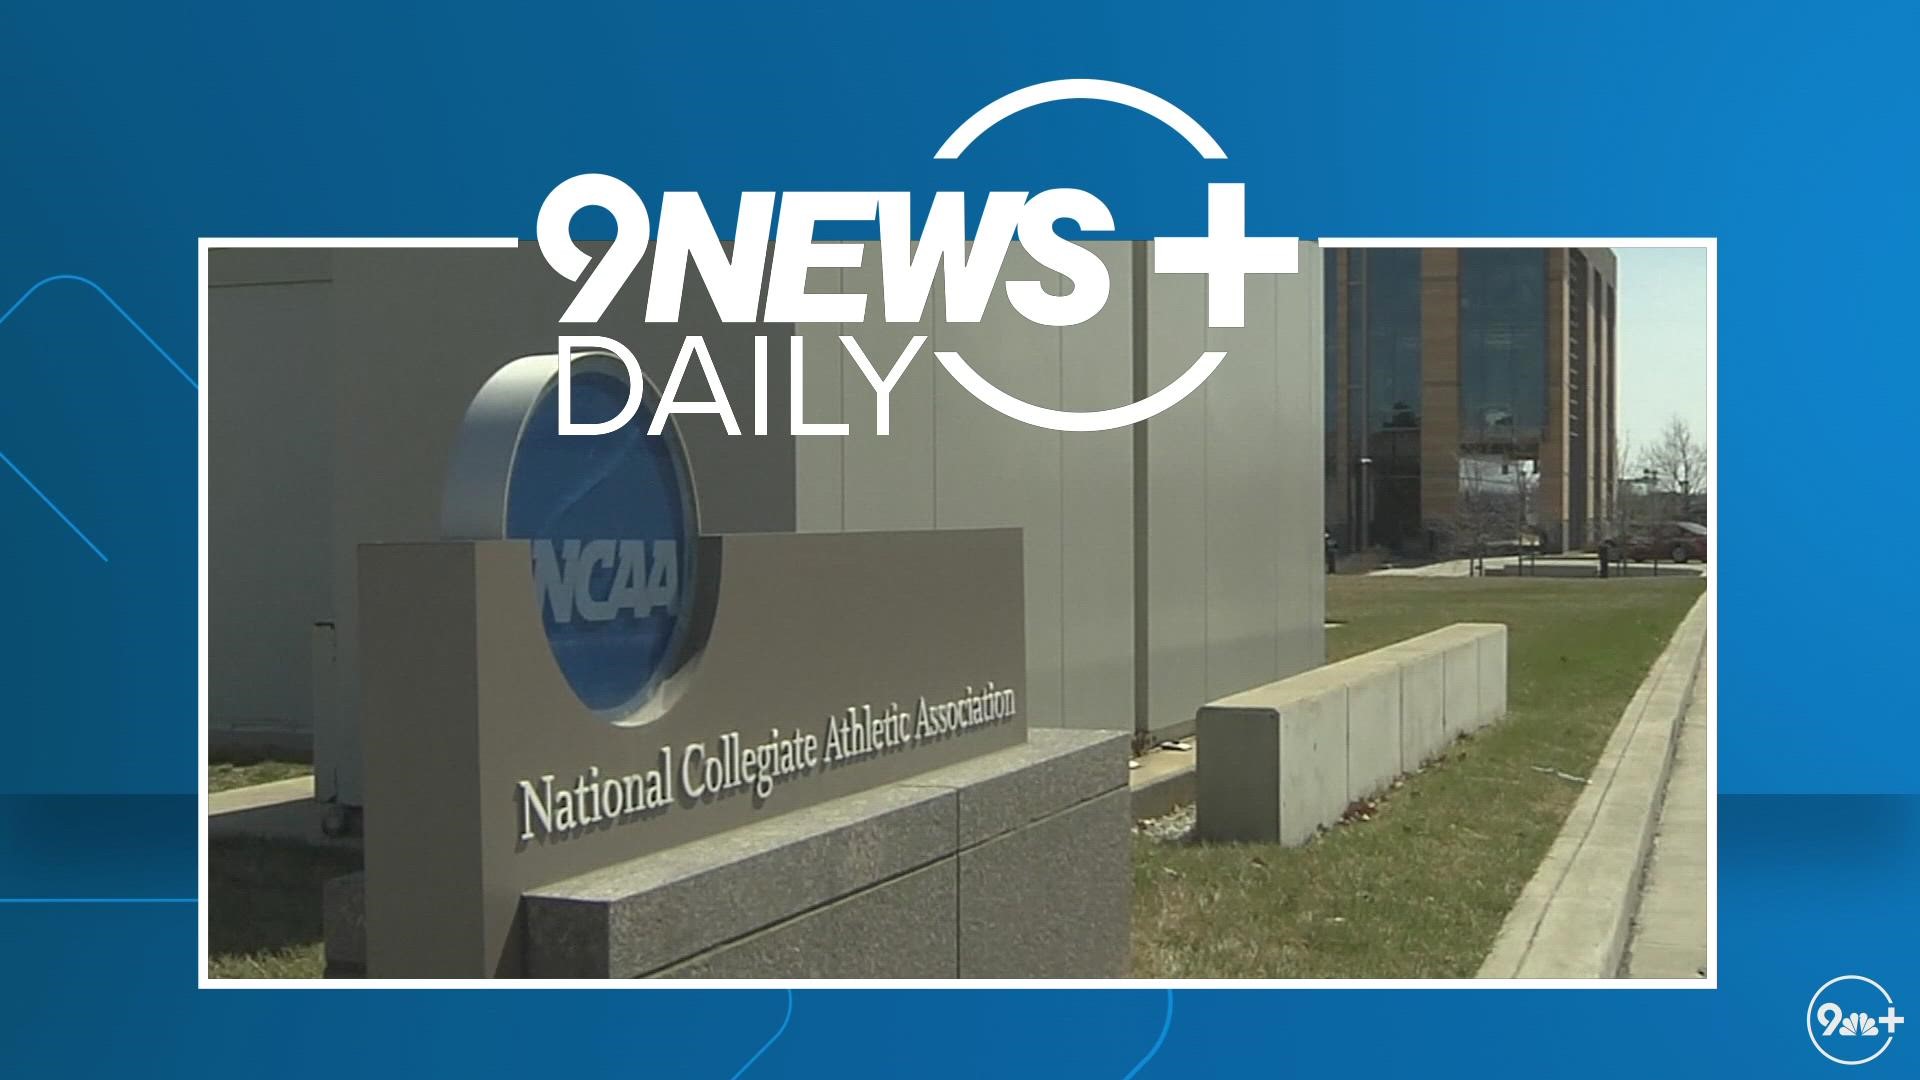 9NEWS Legal Expert Whitney Traylor takes a closer look at NIL deals as the college athlete compensation era heads into its second full sports season.